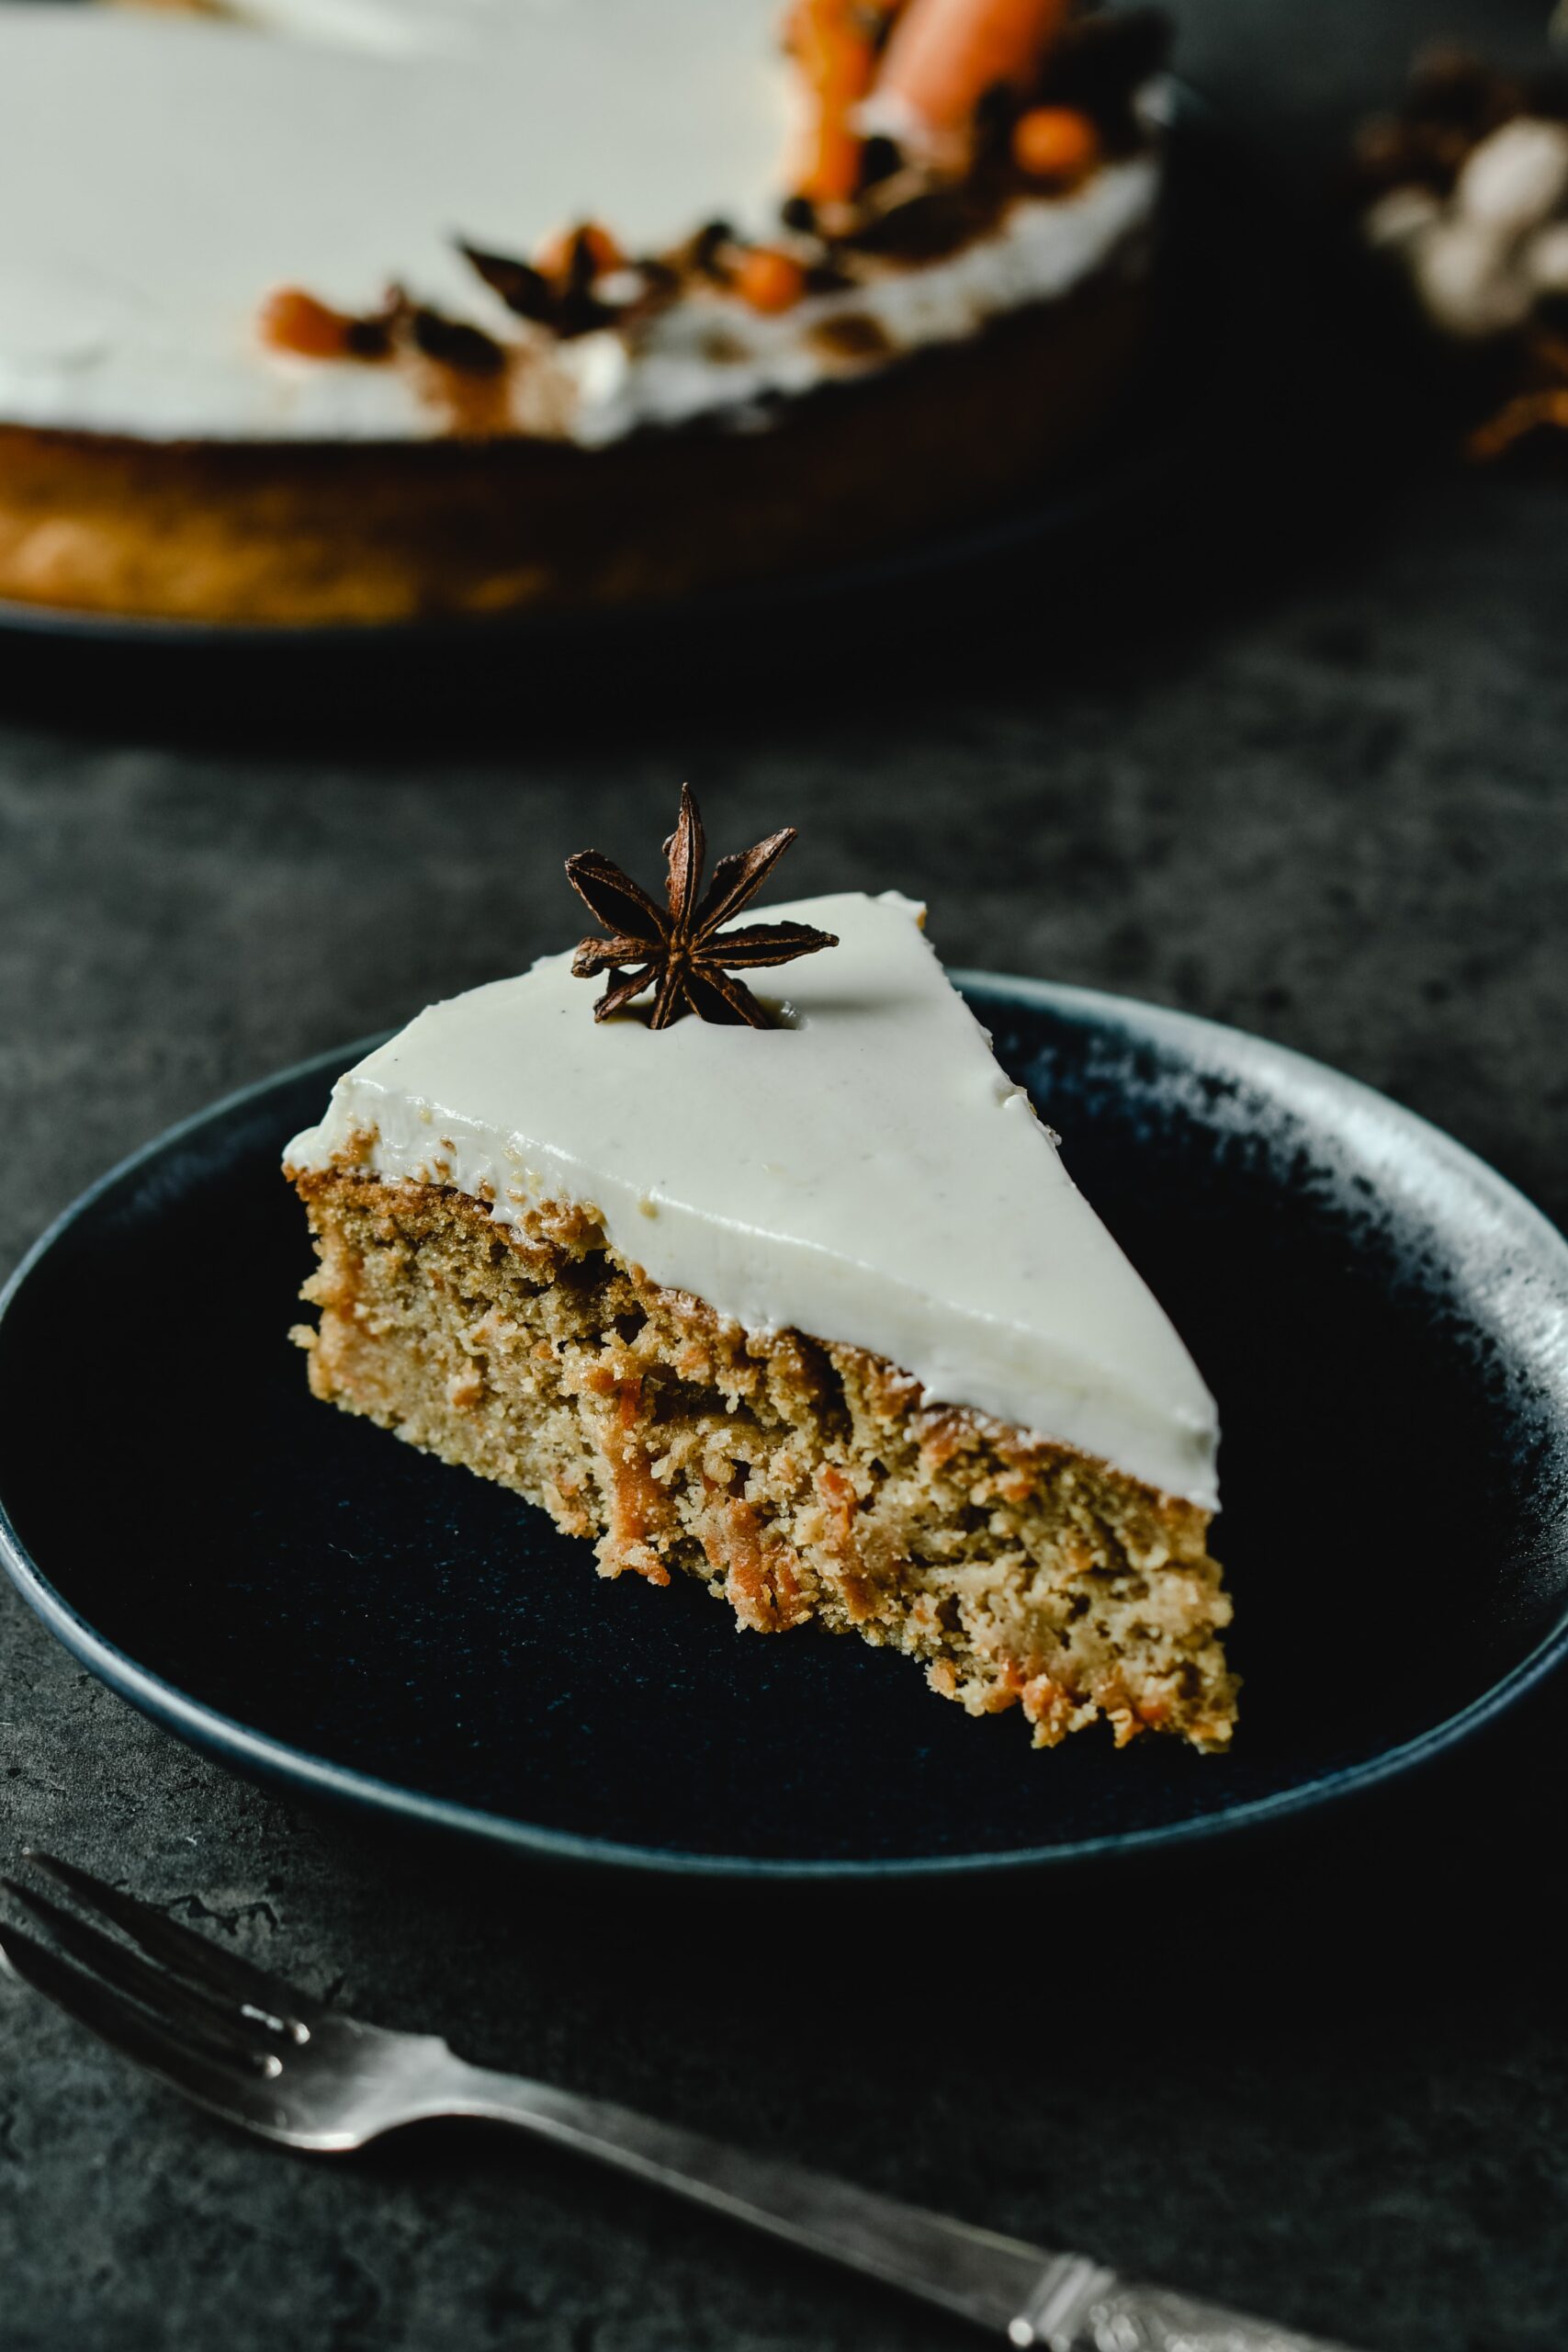 A slice of carrot cake